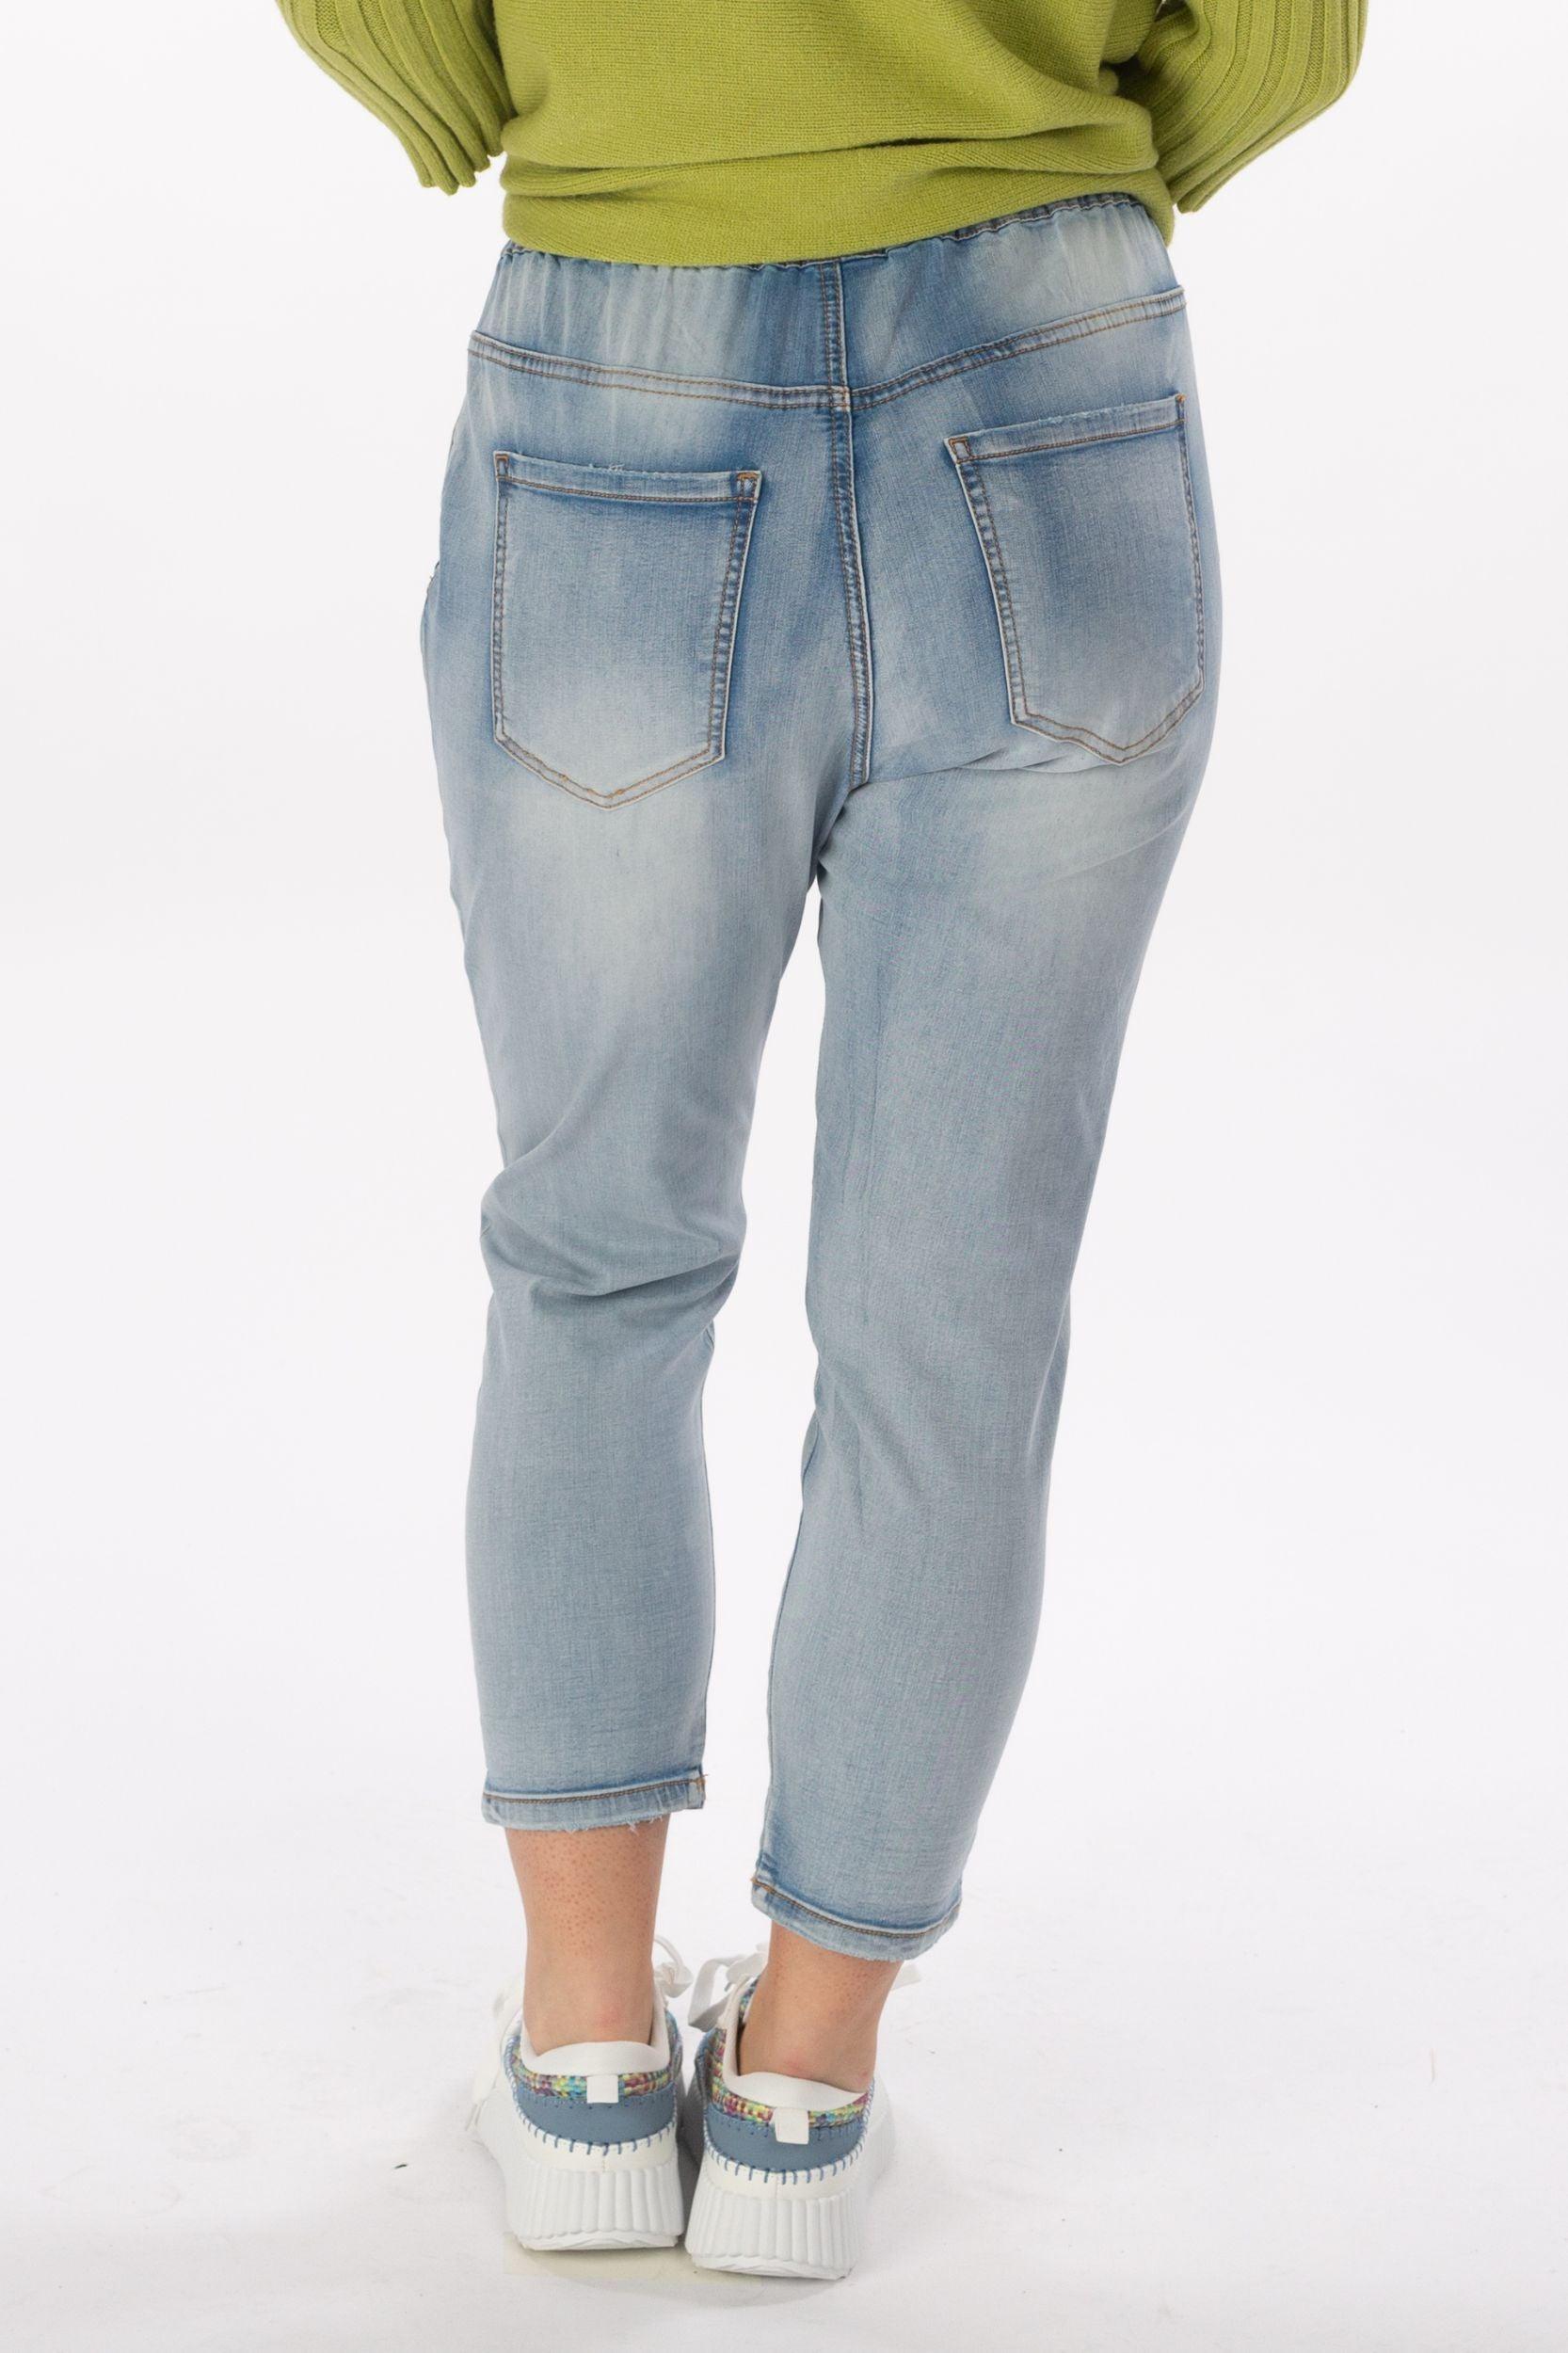 Relaxed Fit Jeans mit floralem Muster - La Strada